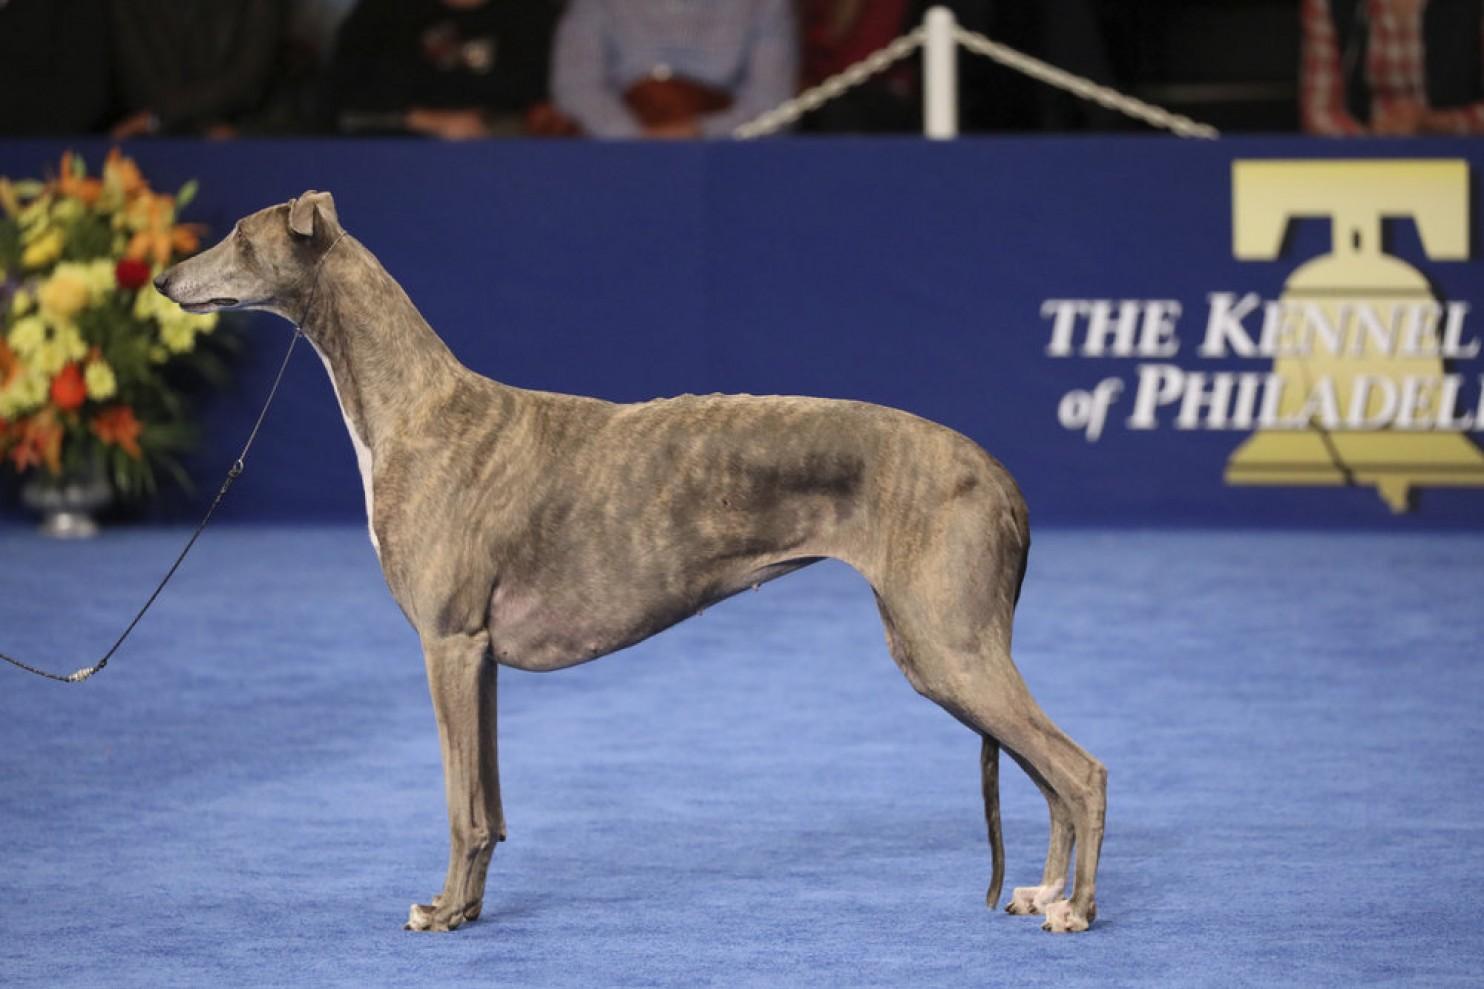 Gia, a Greyhound, wins the National Dog Show | The Spokesman-Review